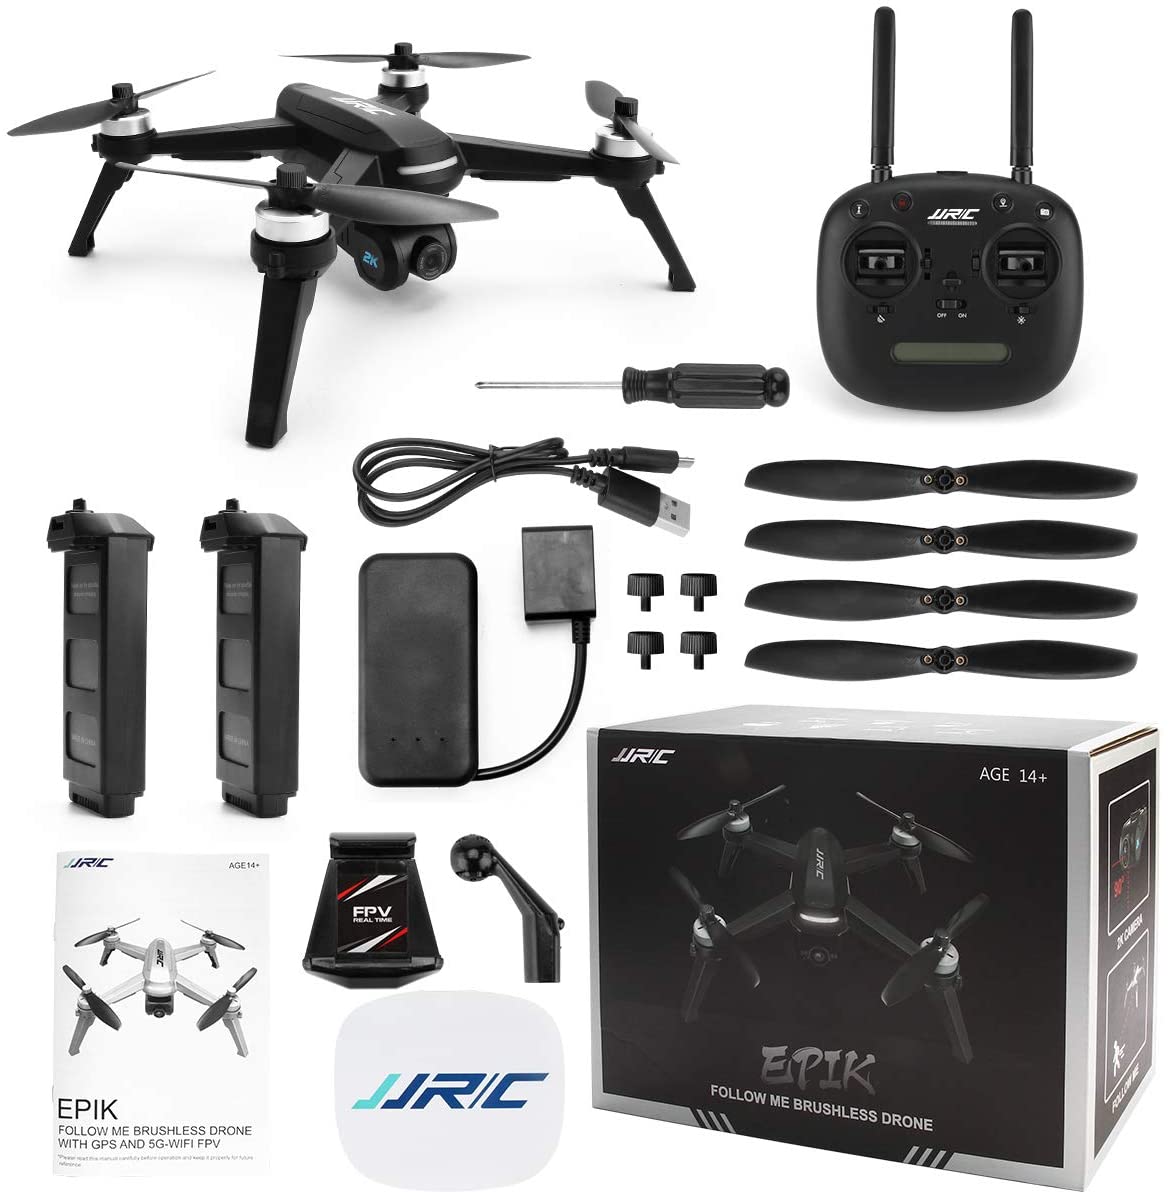 JJRC X5 Brushless Drone 2K Camera WiFi FPV GPS Fixed Height Aerial Photography Drone Quadcopter Black - image 2 of 9